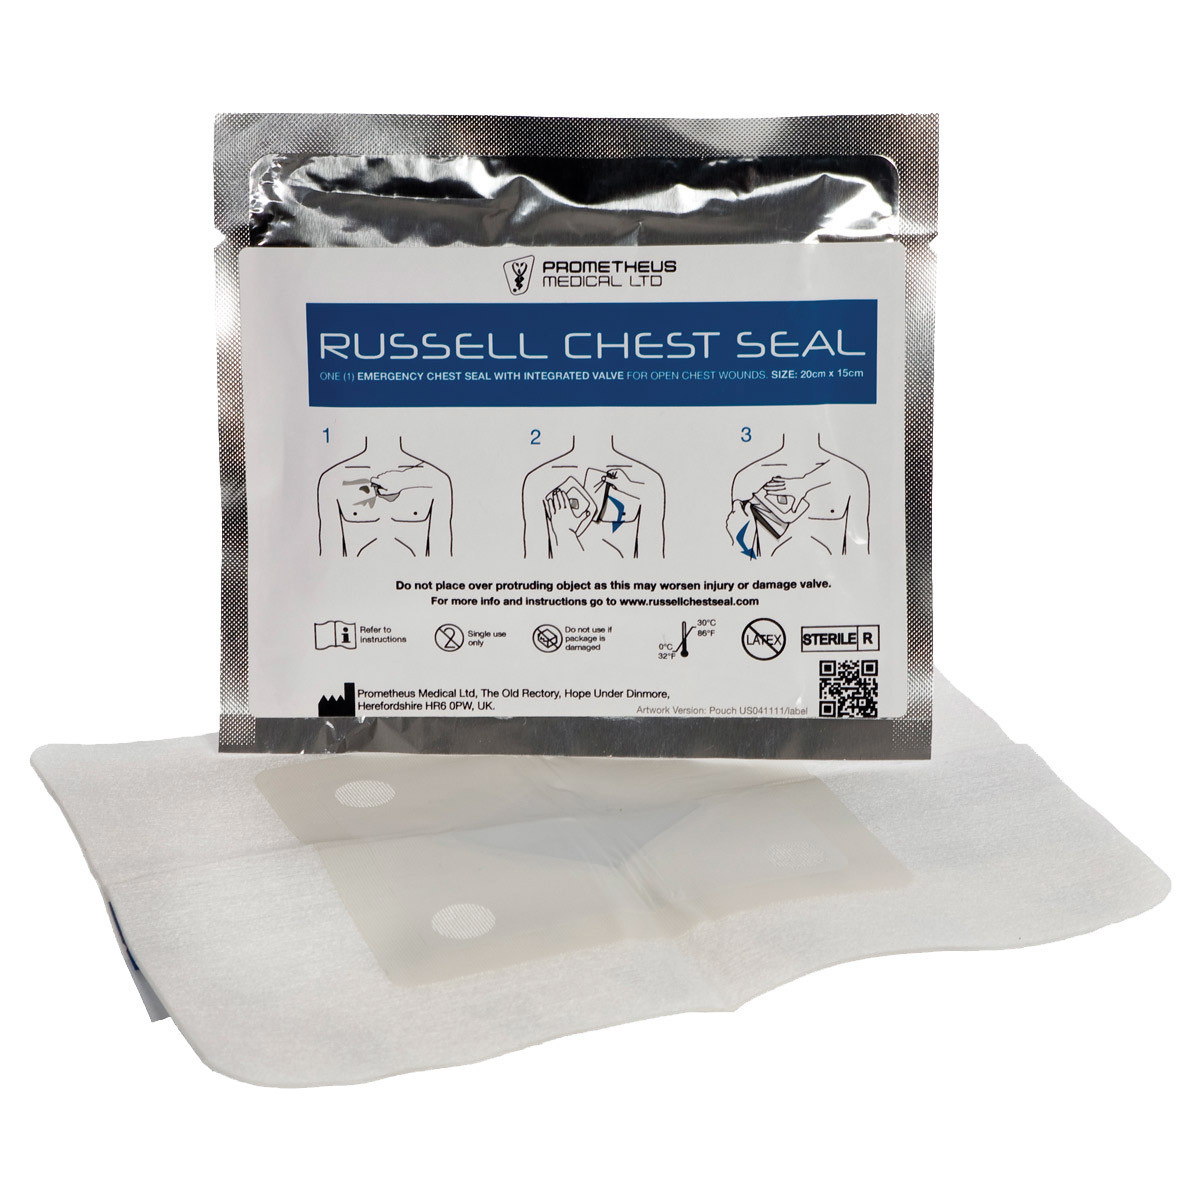 Aposito Hidrogel Russell Chest Seal